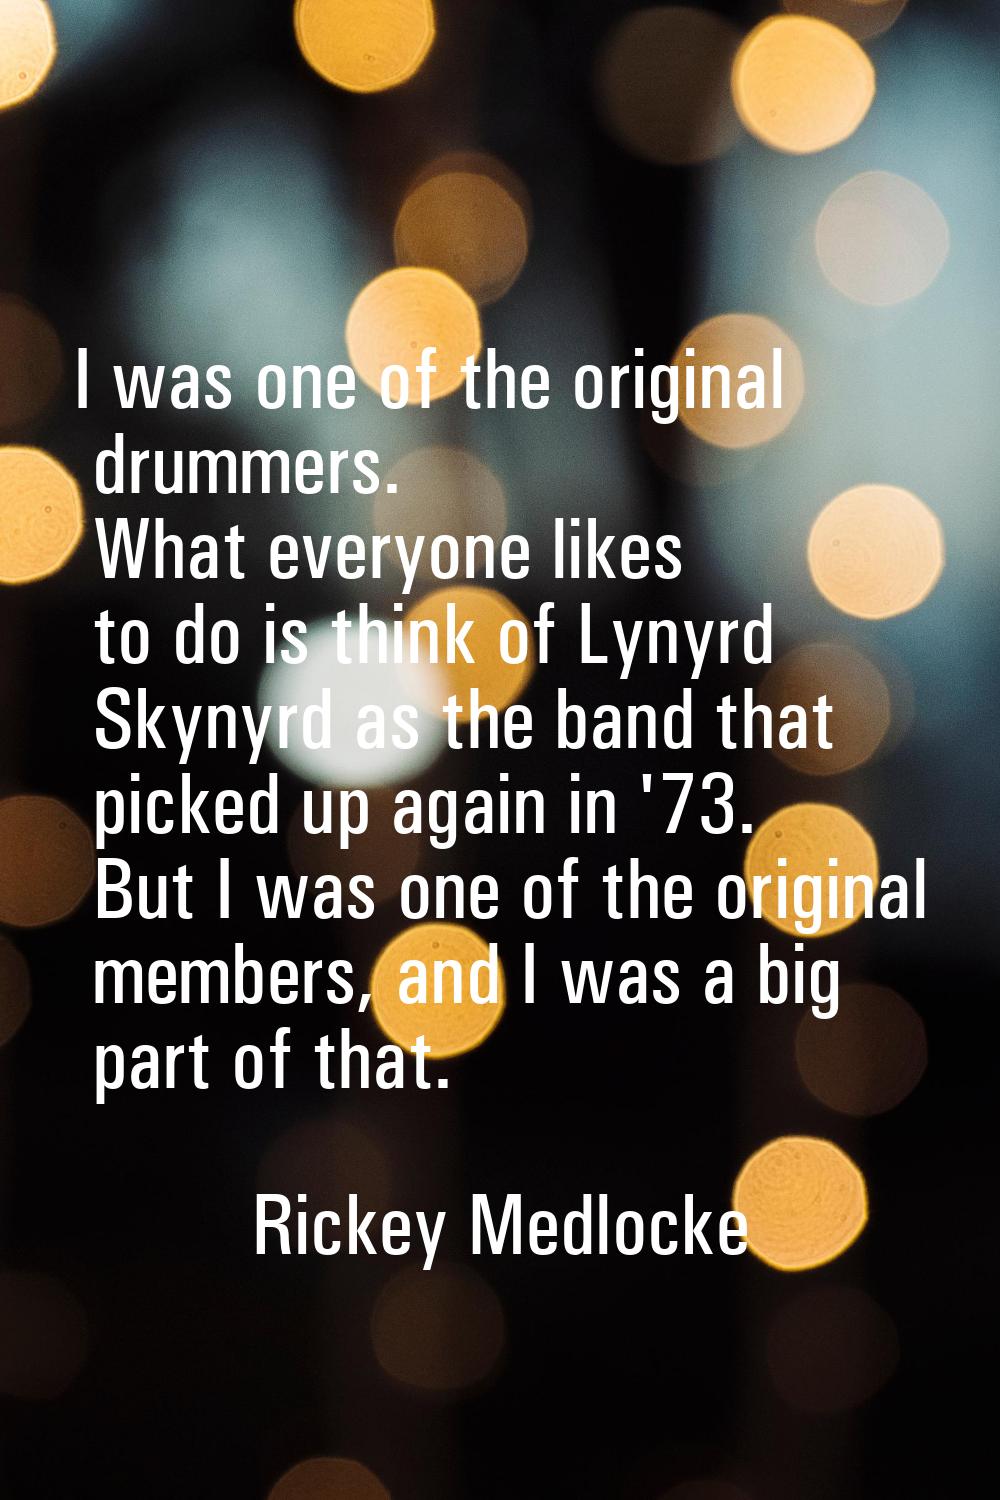 I was one of the original drummers. What everyone likes to do is think of Lynyrd Skynyrd as the ban